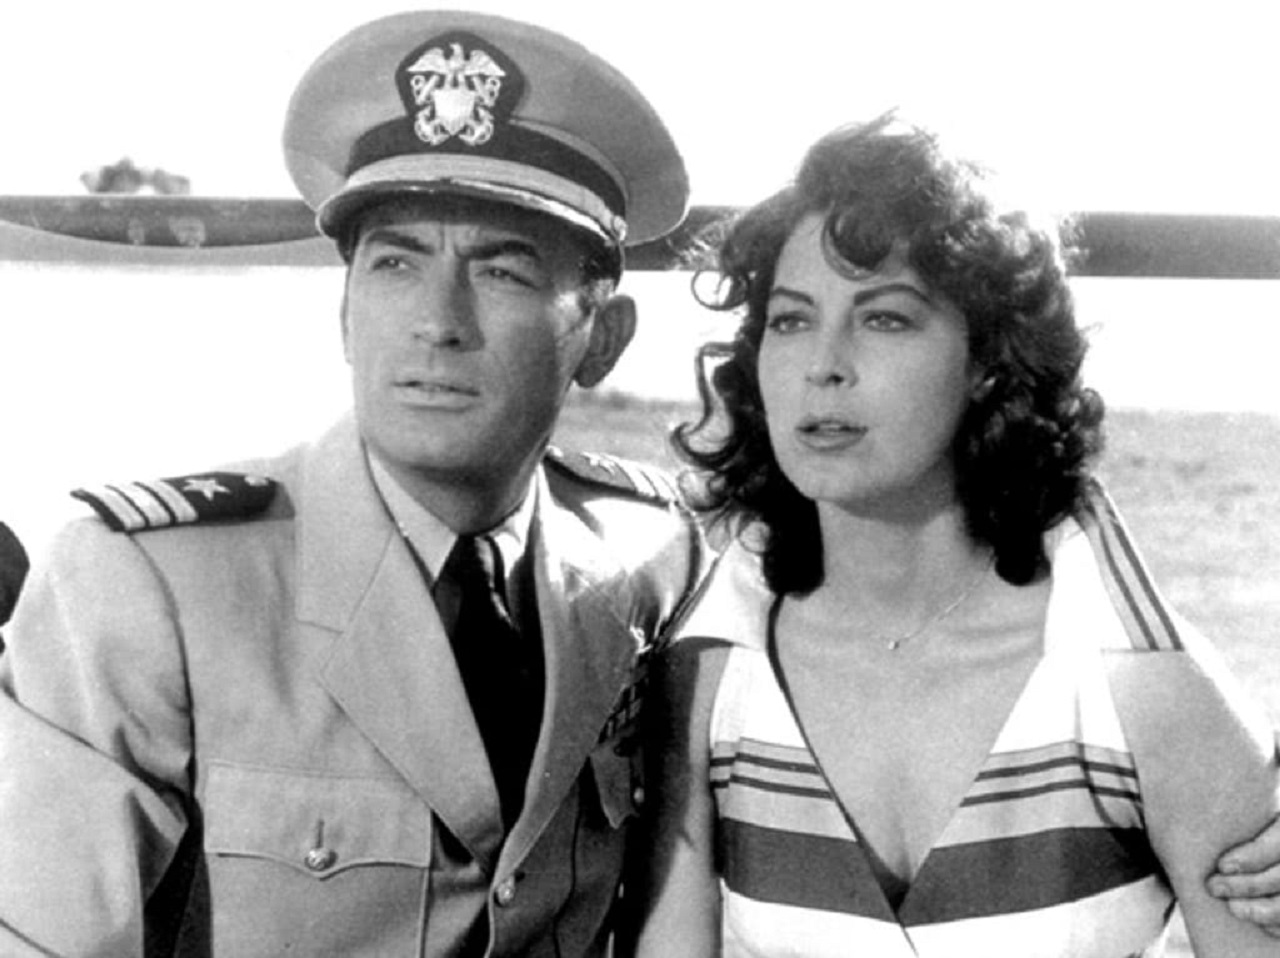 Commander Dwight Towers (Gregory Peck) and Moira Davidson (Ava Gardner) in On the Beach (1959)